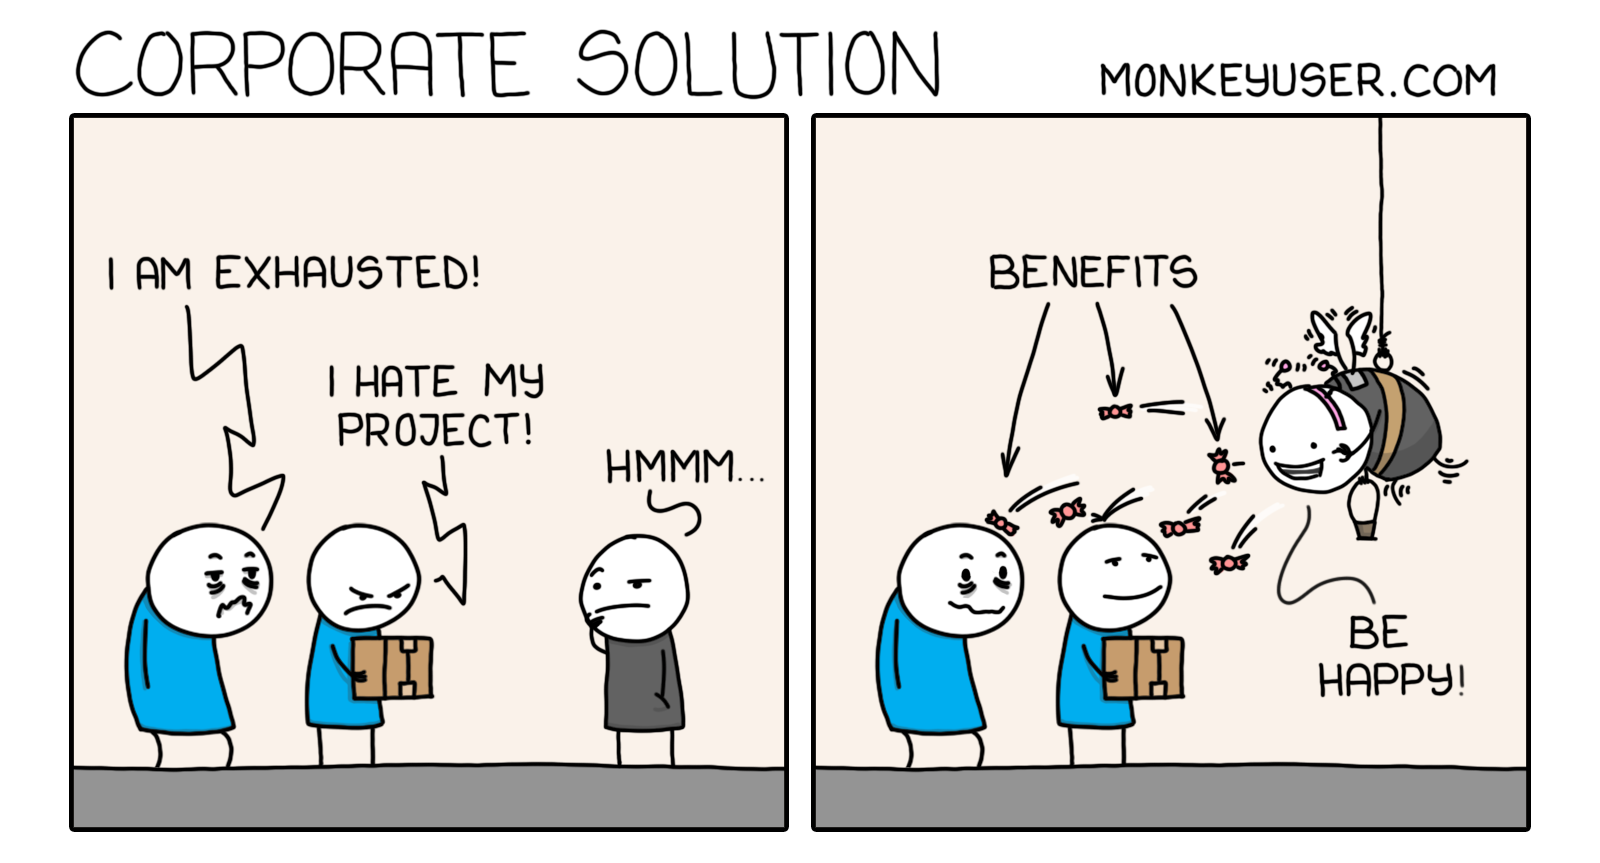 Corporate Solution